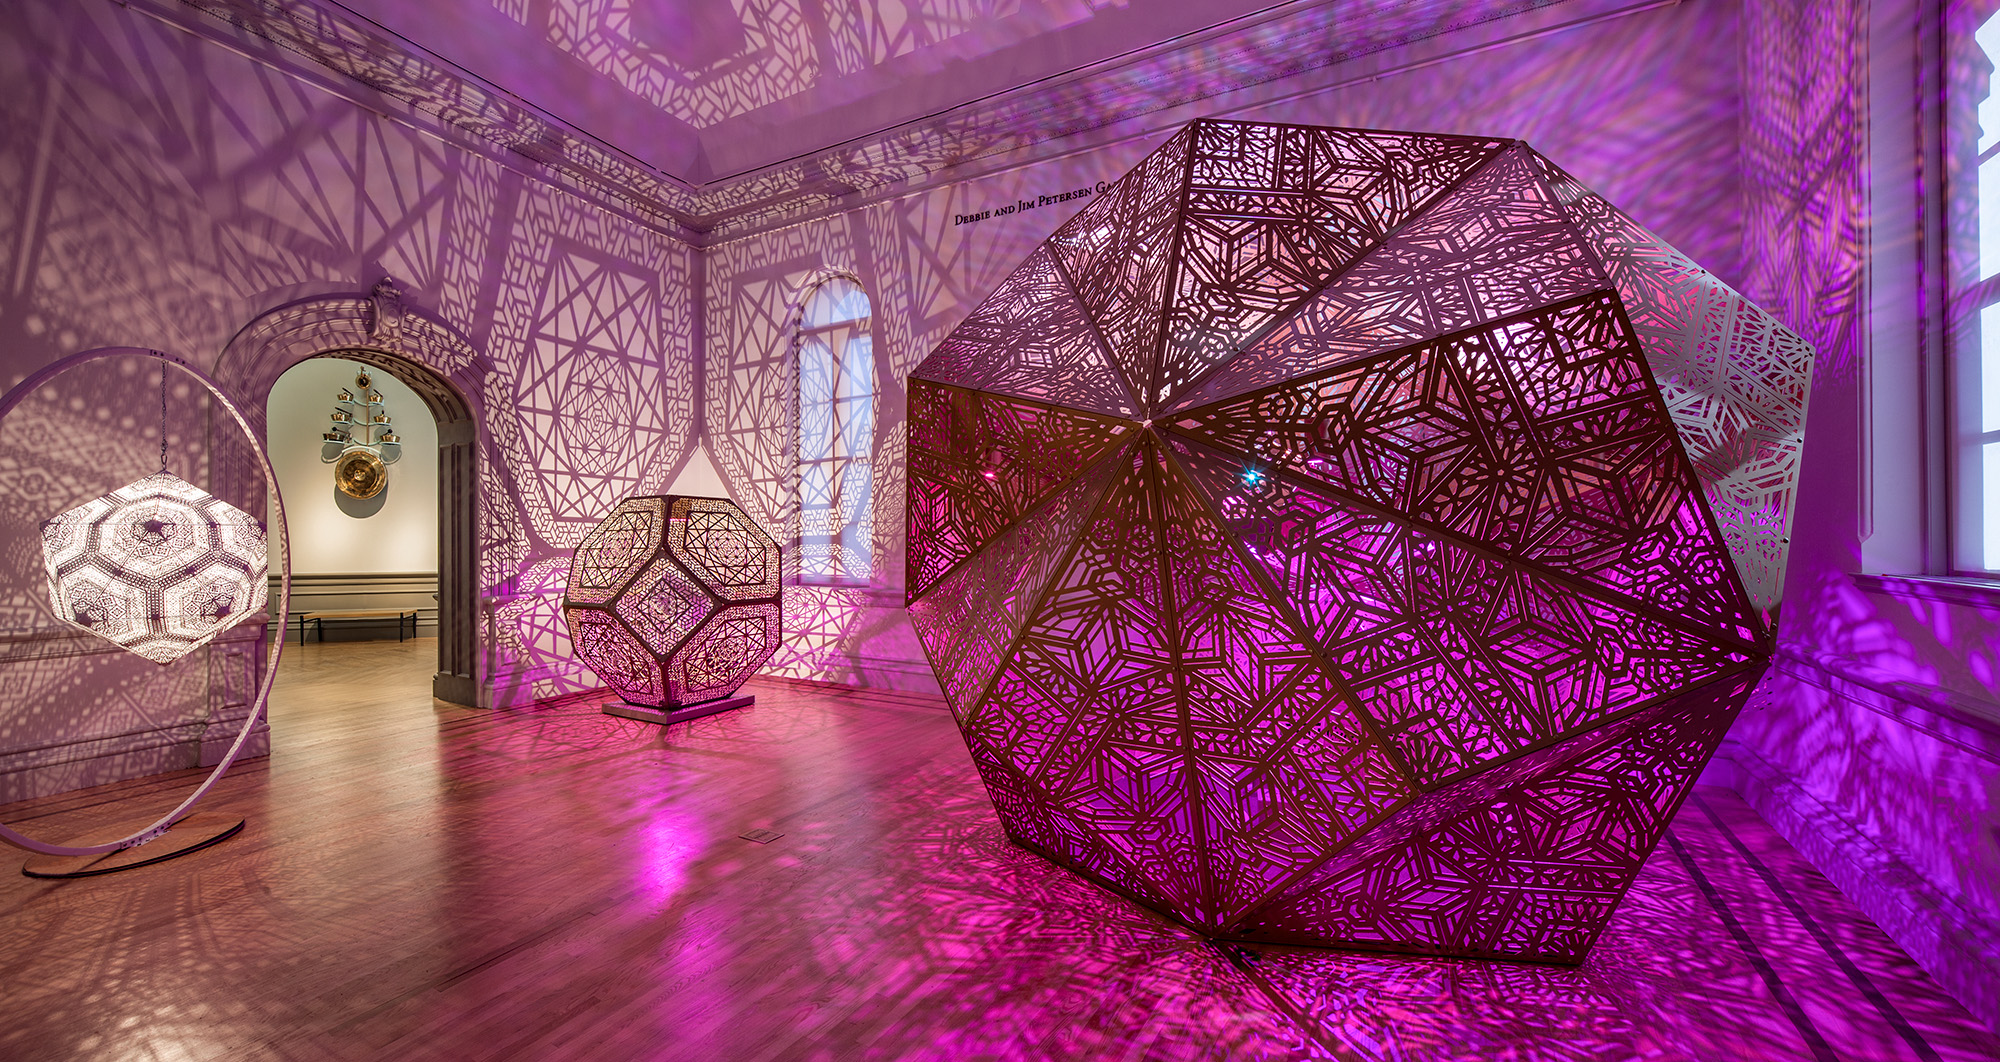 Large paper sculptures from Burning Man illuminated with pink and purple light